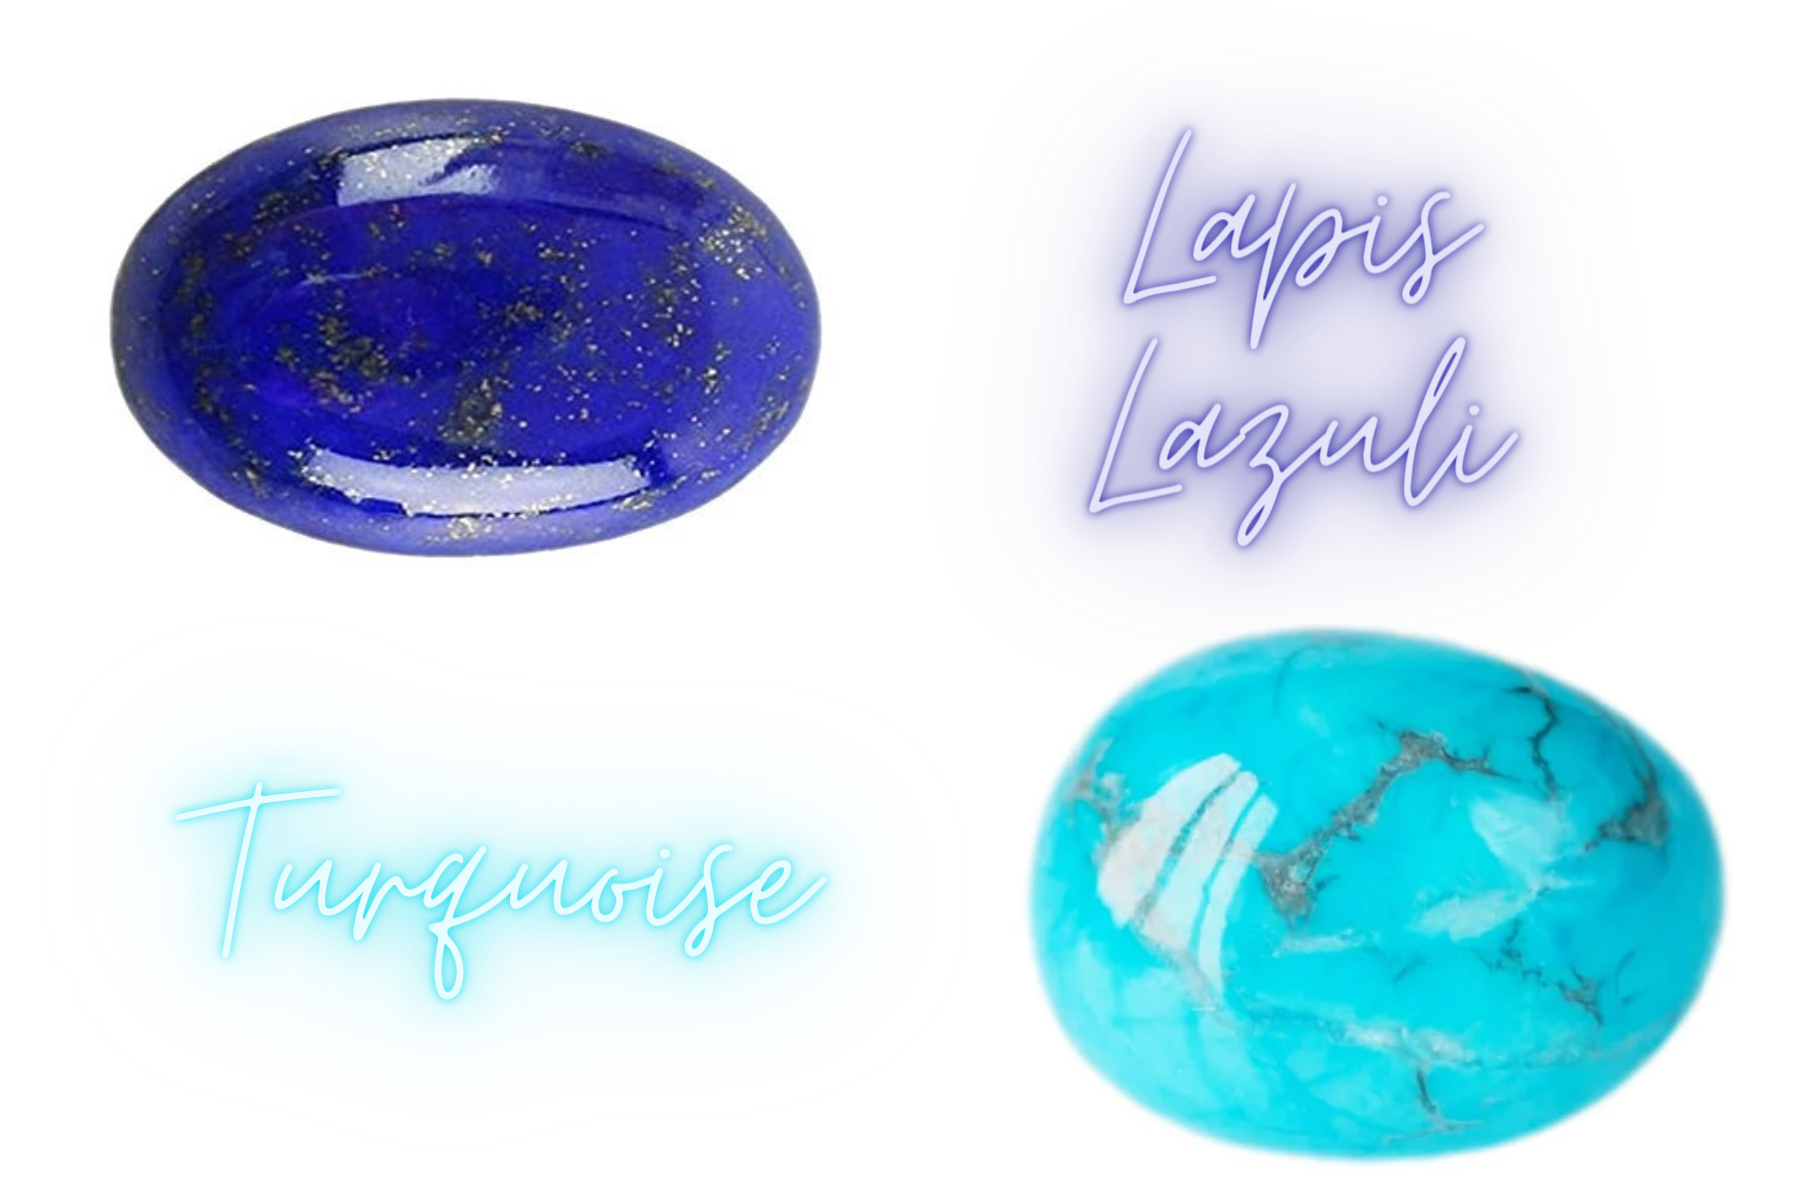 Lapis lazuli and Turquoise crystals